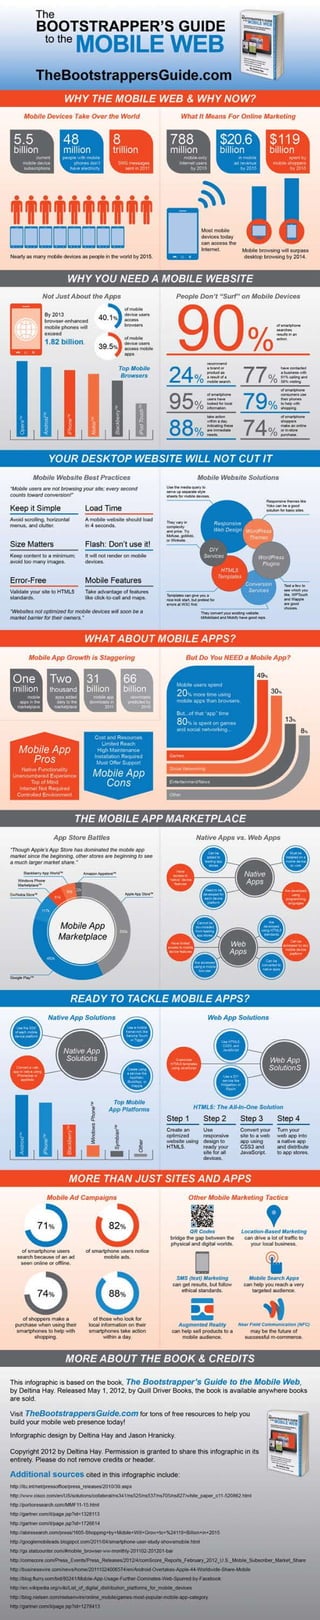 Infographic About the Mobile Web